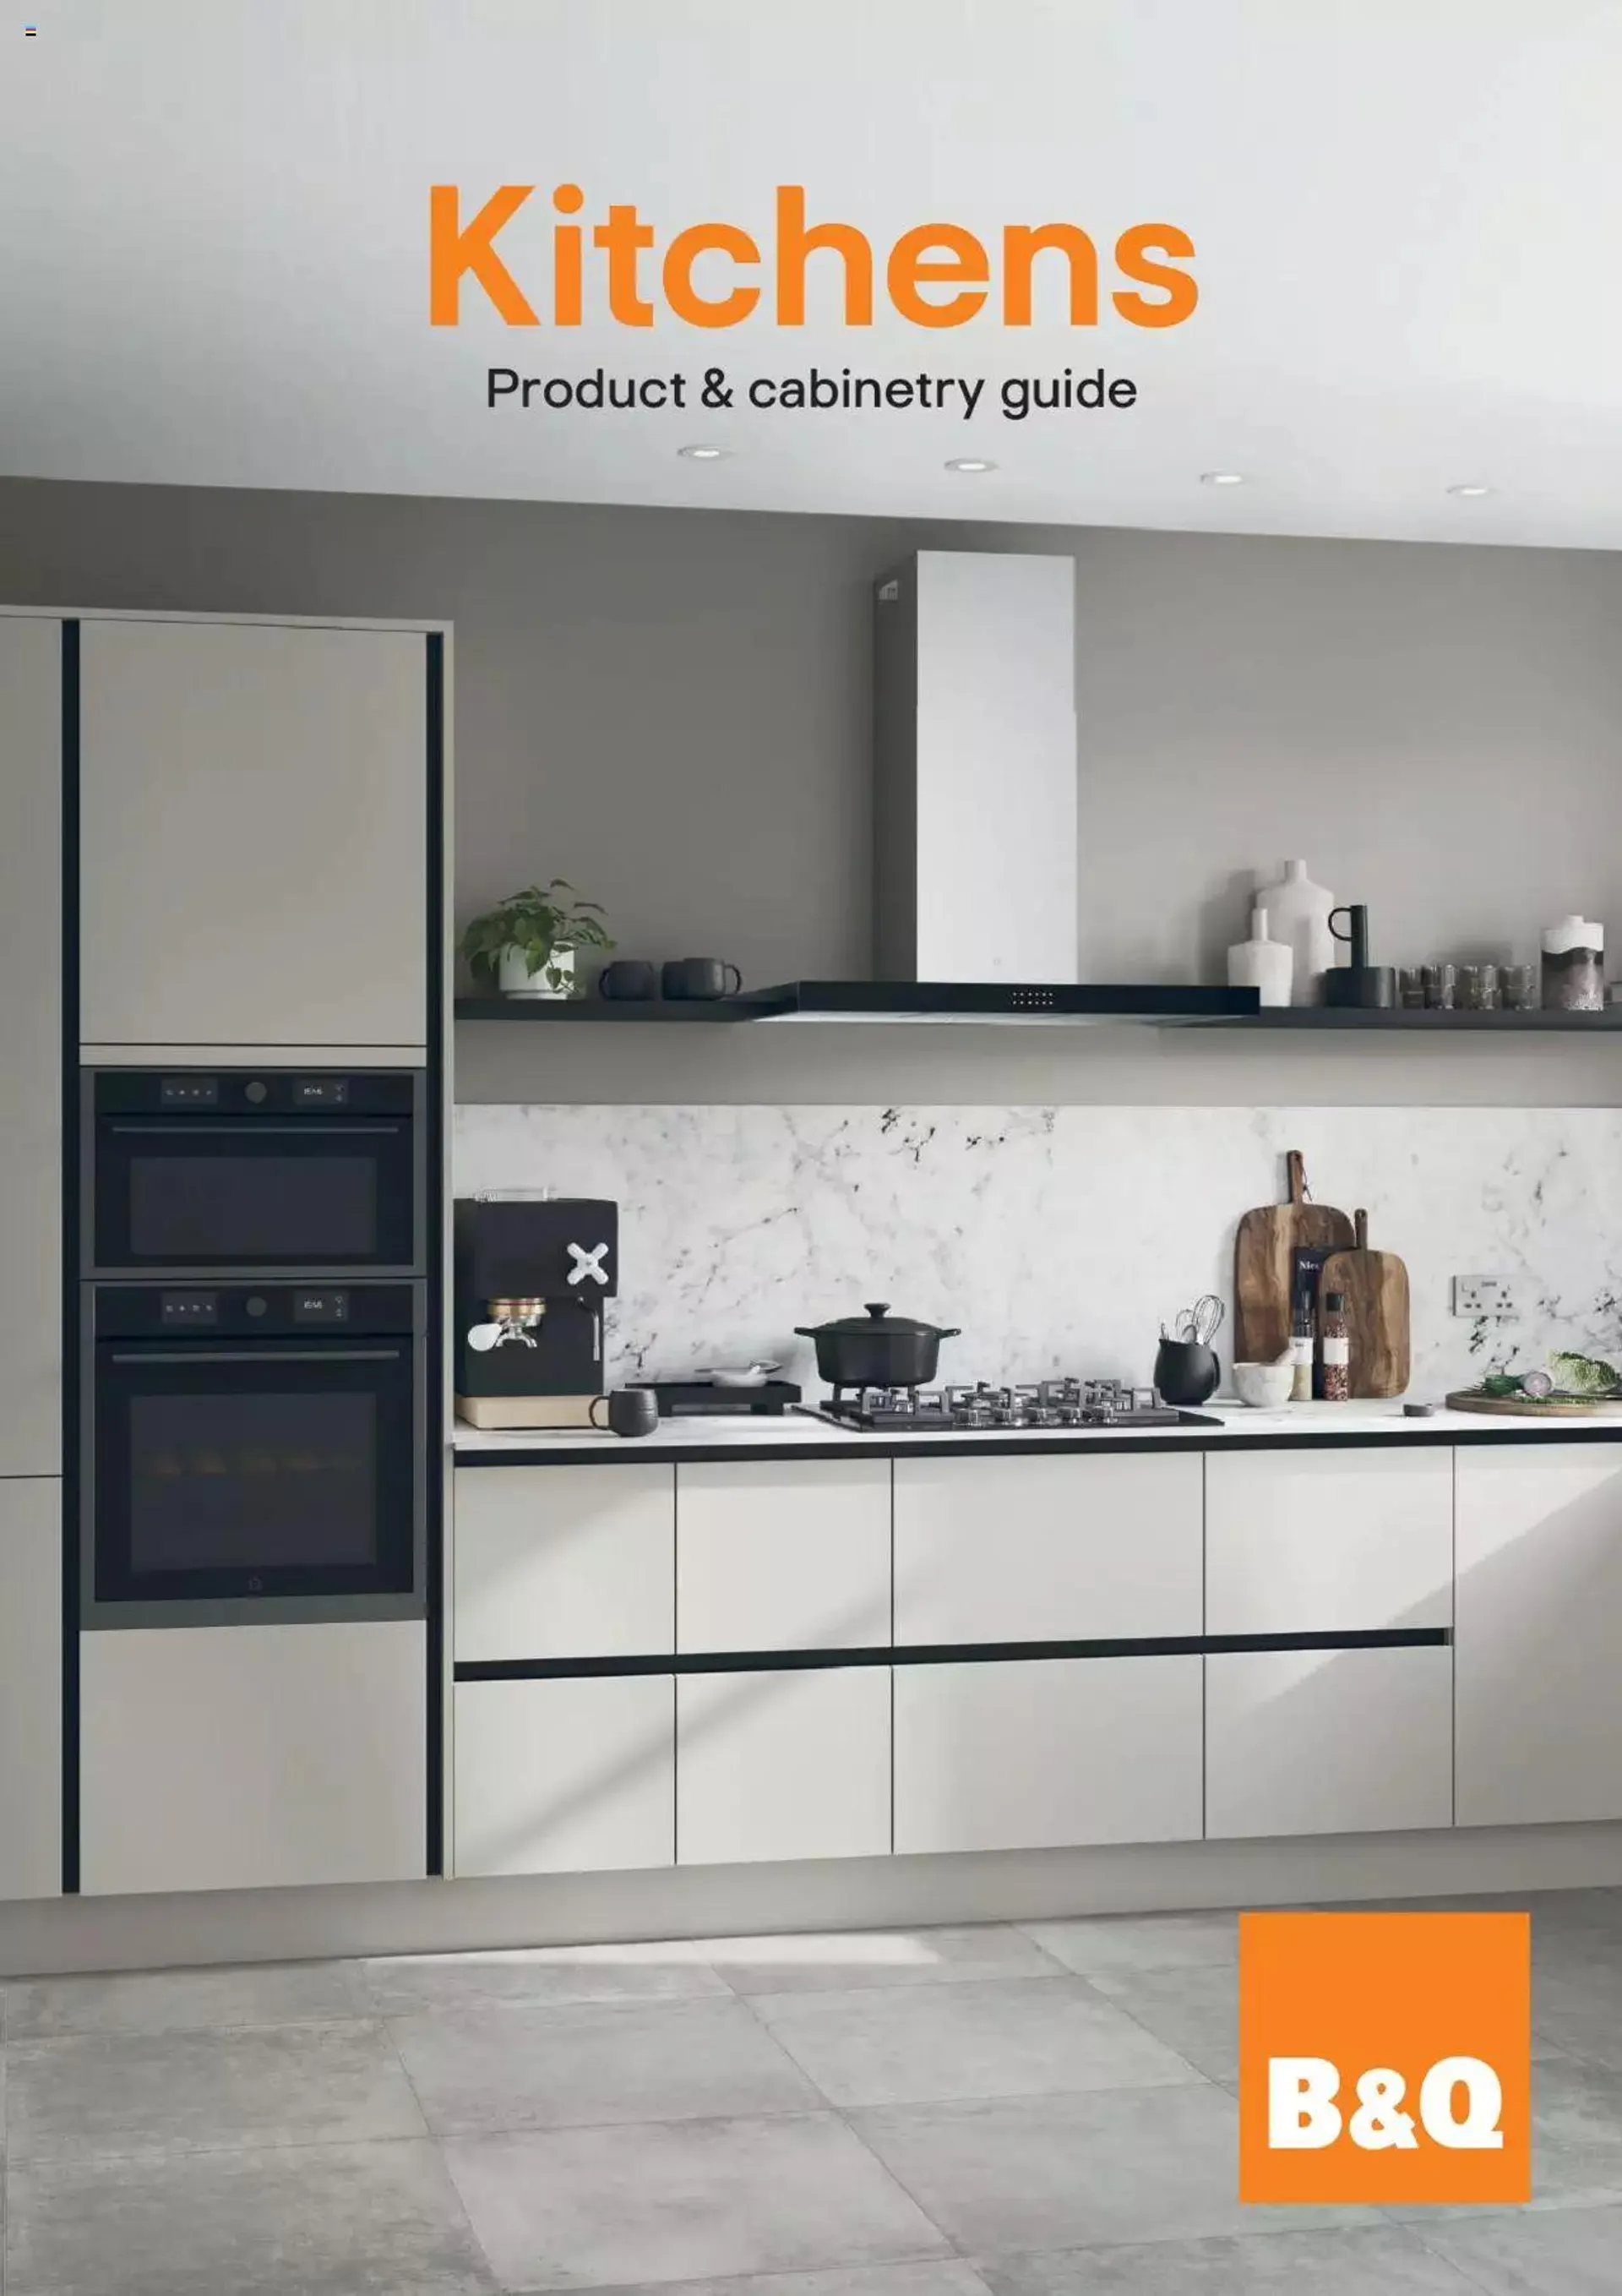 B&Q - Kitchens product & cabinetry guide - 0